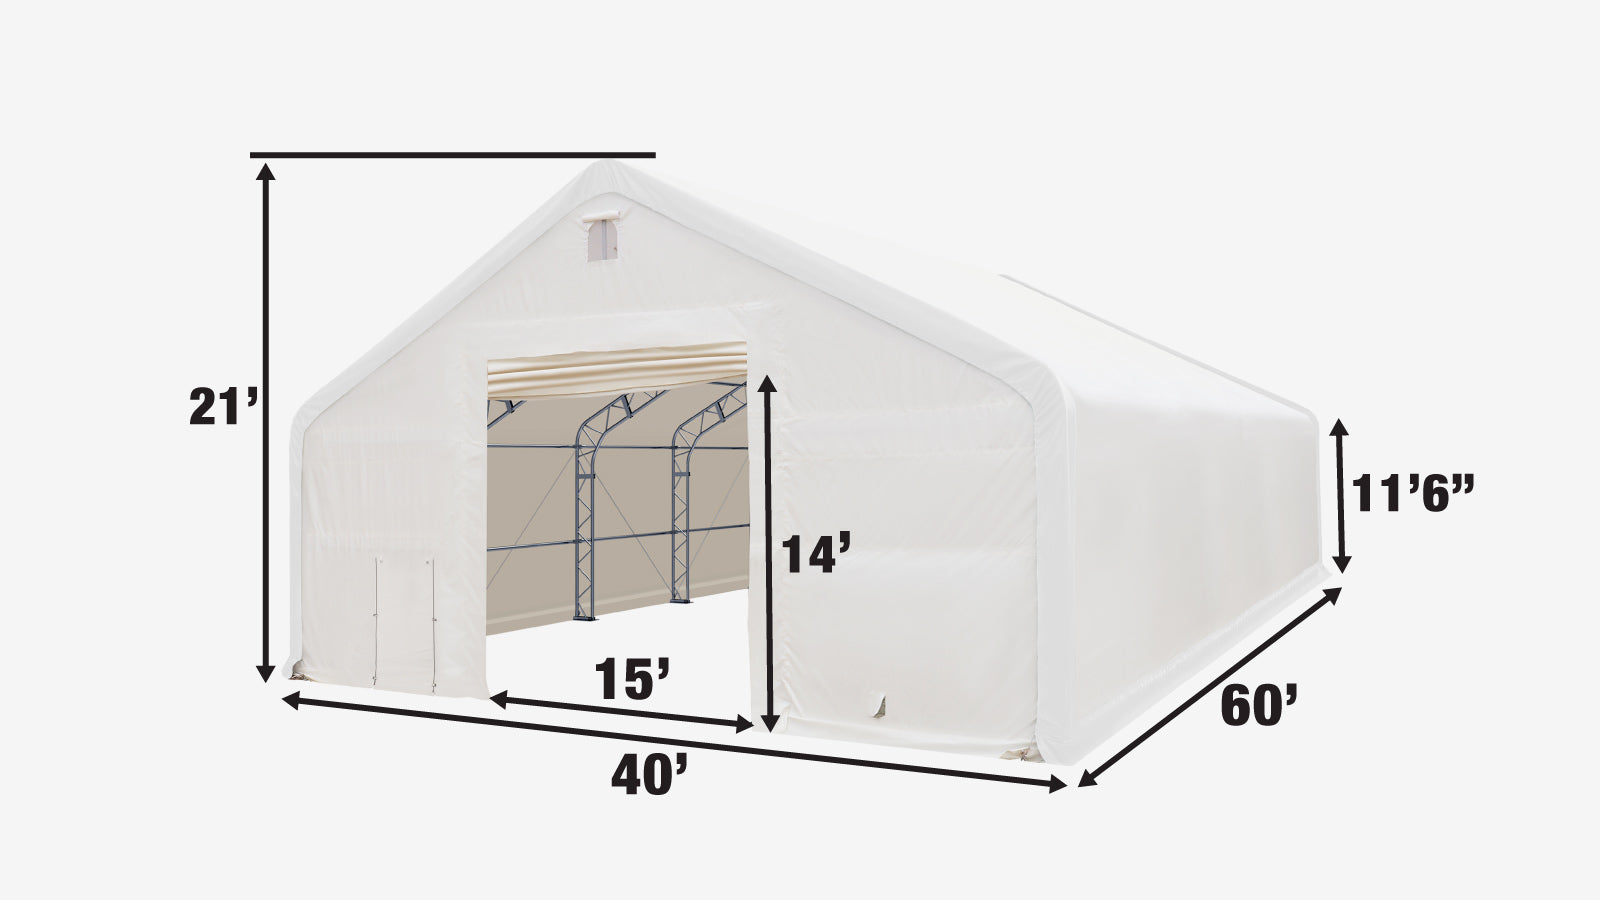 TMG Industrial 40' x 60' Dual Truss Storage Shelter with Heavy Duty 21 oz PVC Cover & Drive Through Doors, TMG-DT4061-specifications-image